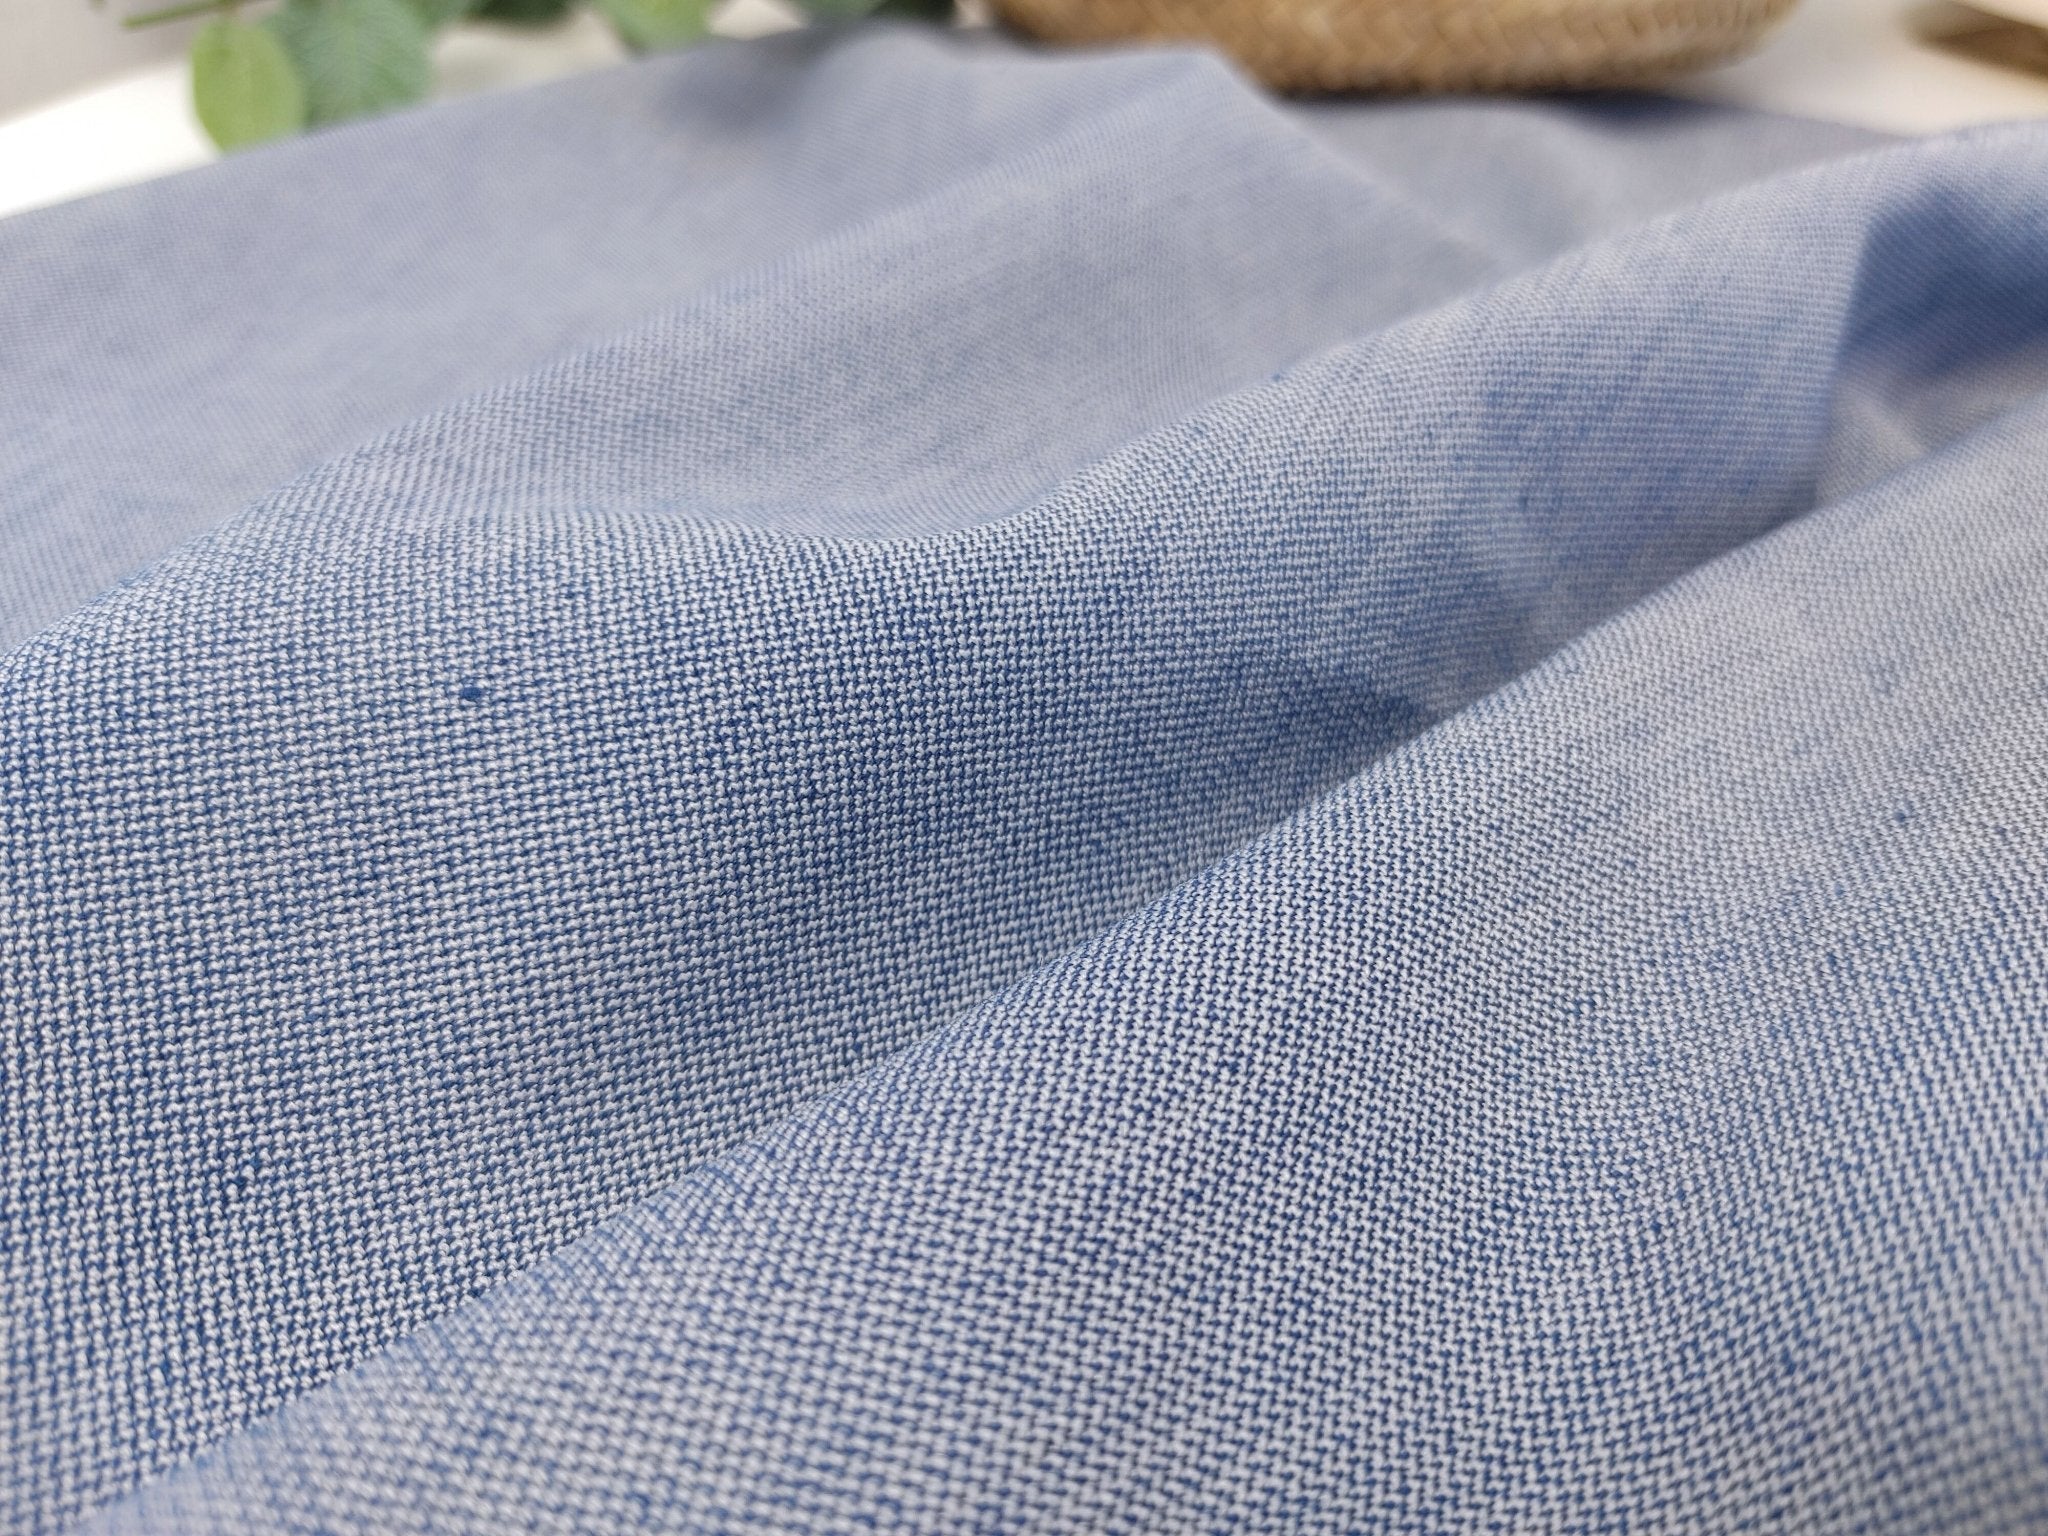 Blue Harmony Linen Blend: Stretch Dobby Chambray Fabric 3960 - The Linen Lab - Blue